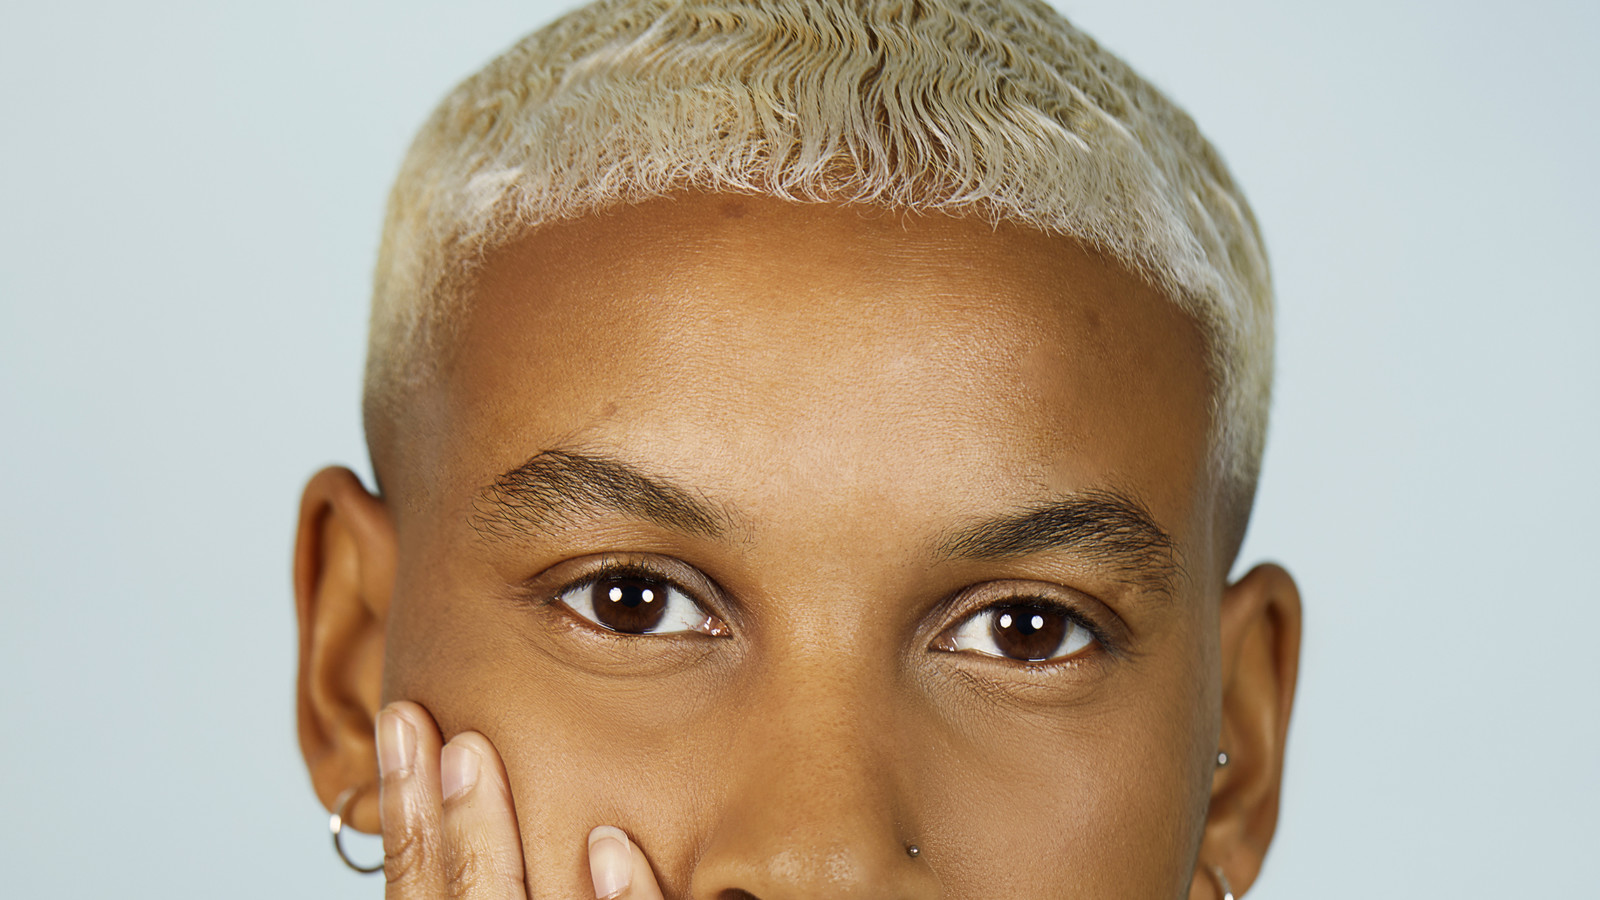 Kei is a Black person with bleached blond, cropped hair. They wear silver jewellery and a pastel green t-shirt.